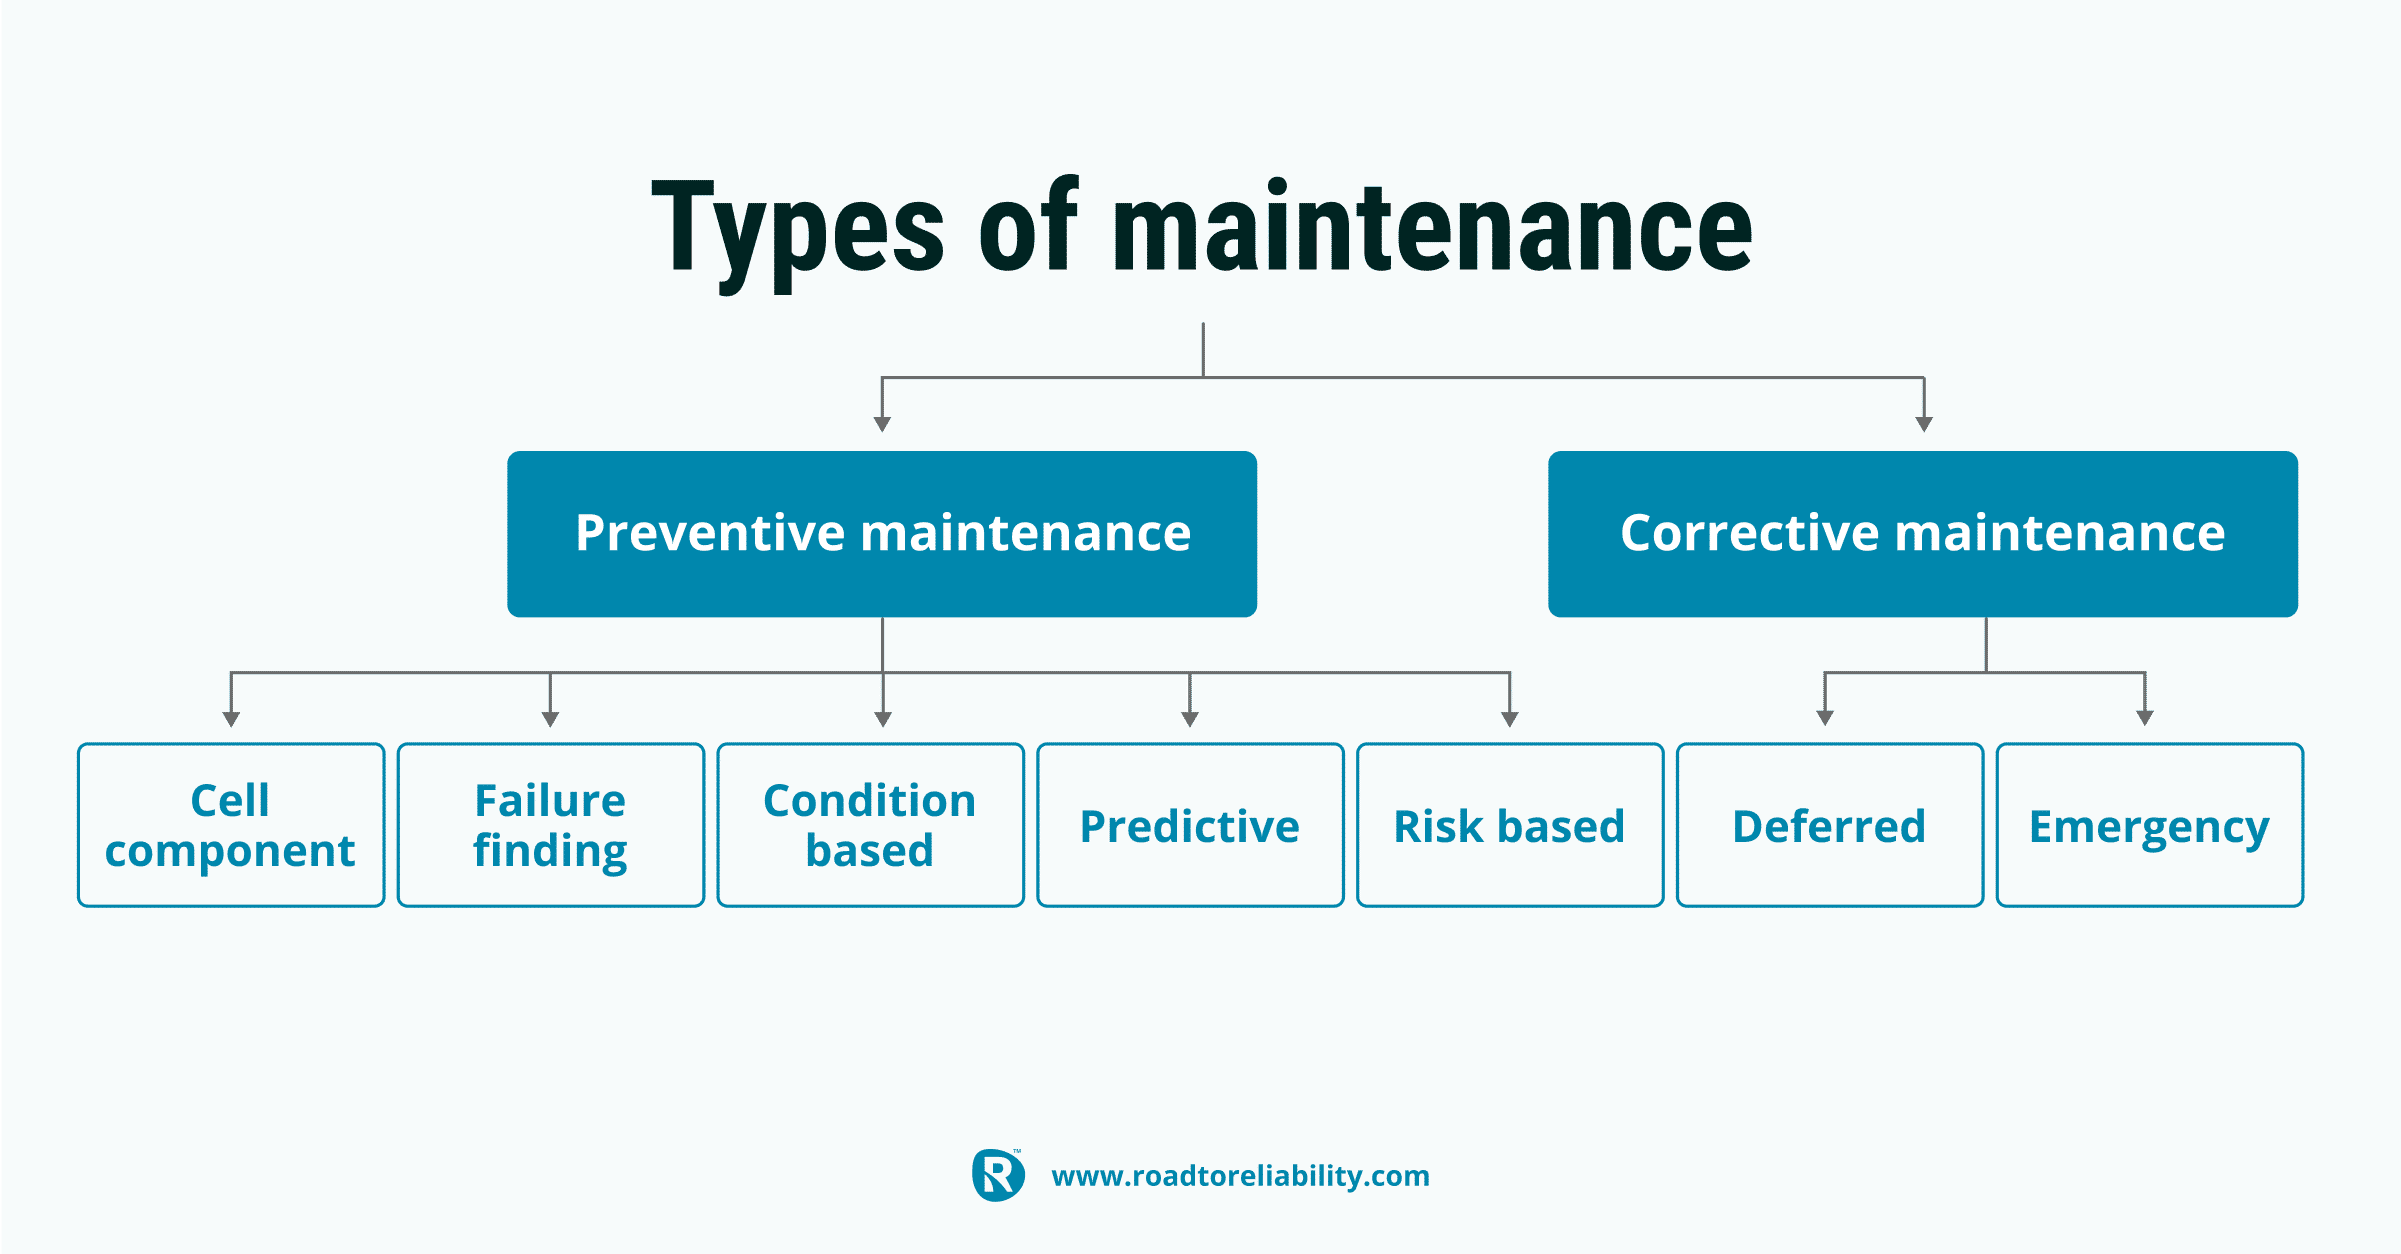 9 Types of Maintenance: choosing the right maintenance types